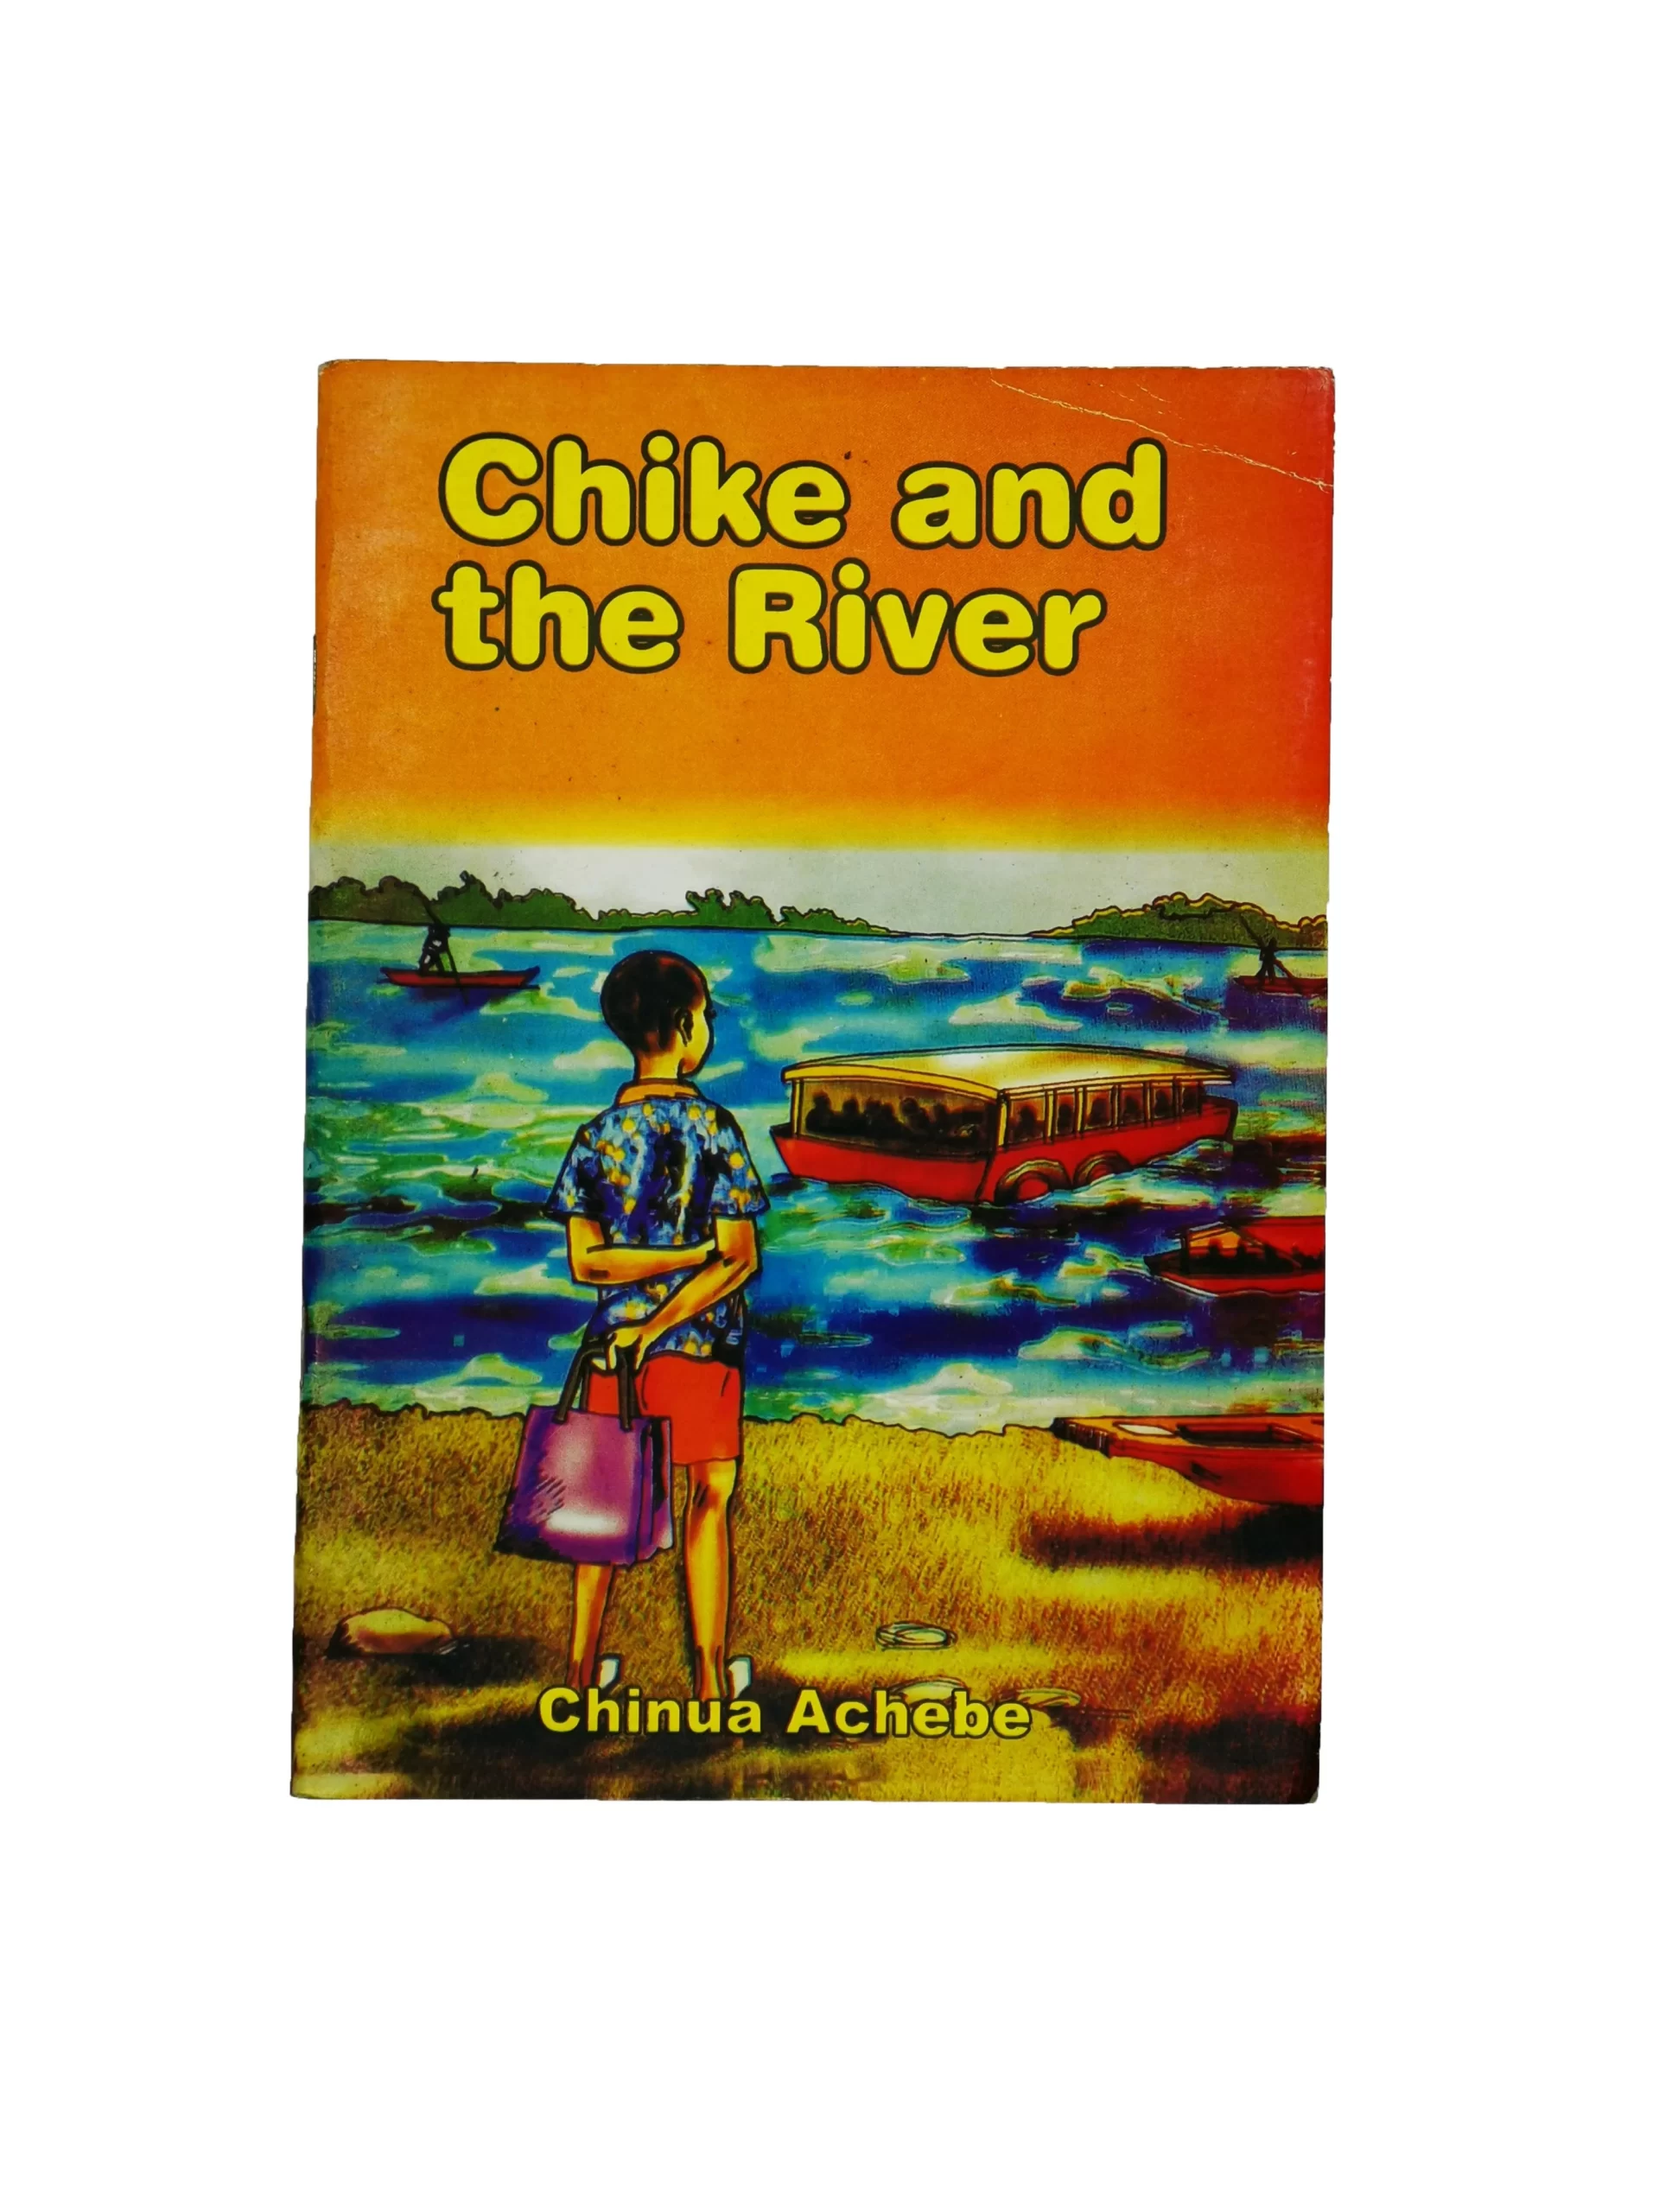 CHIKE AND THE RIVER (Local Ed.)